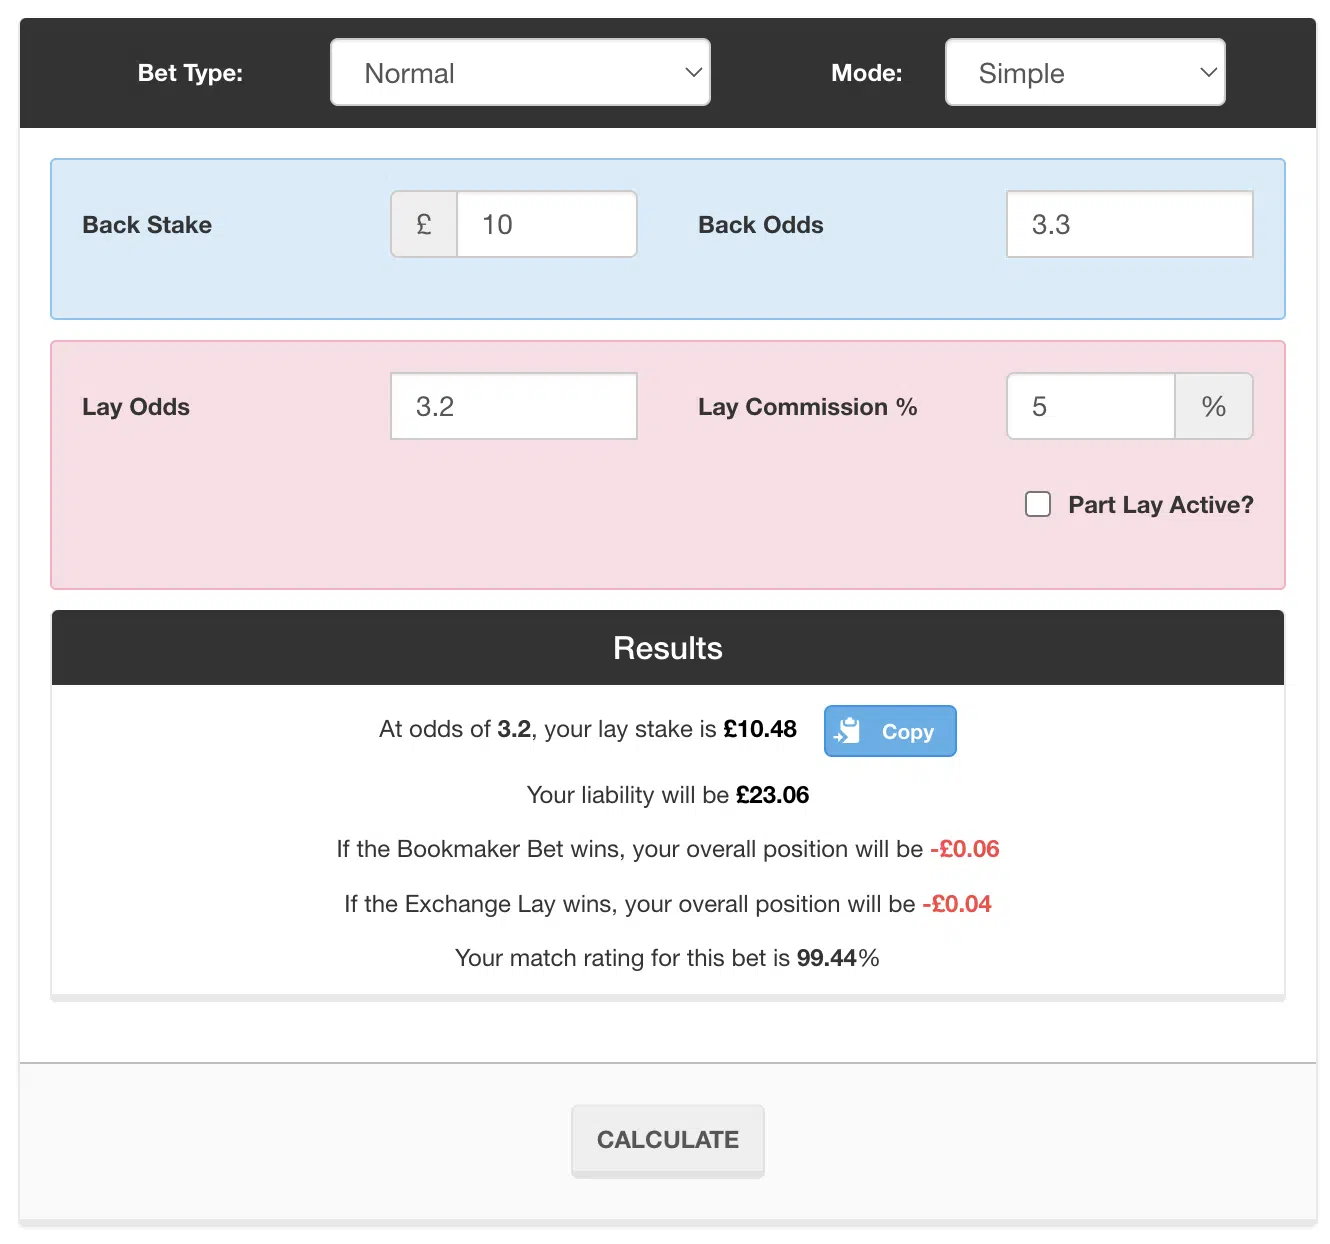 screenshot of Profit Accumulator's matched betting calculator showing how to calculate your qualifying bet.